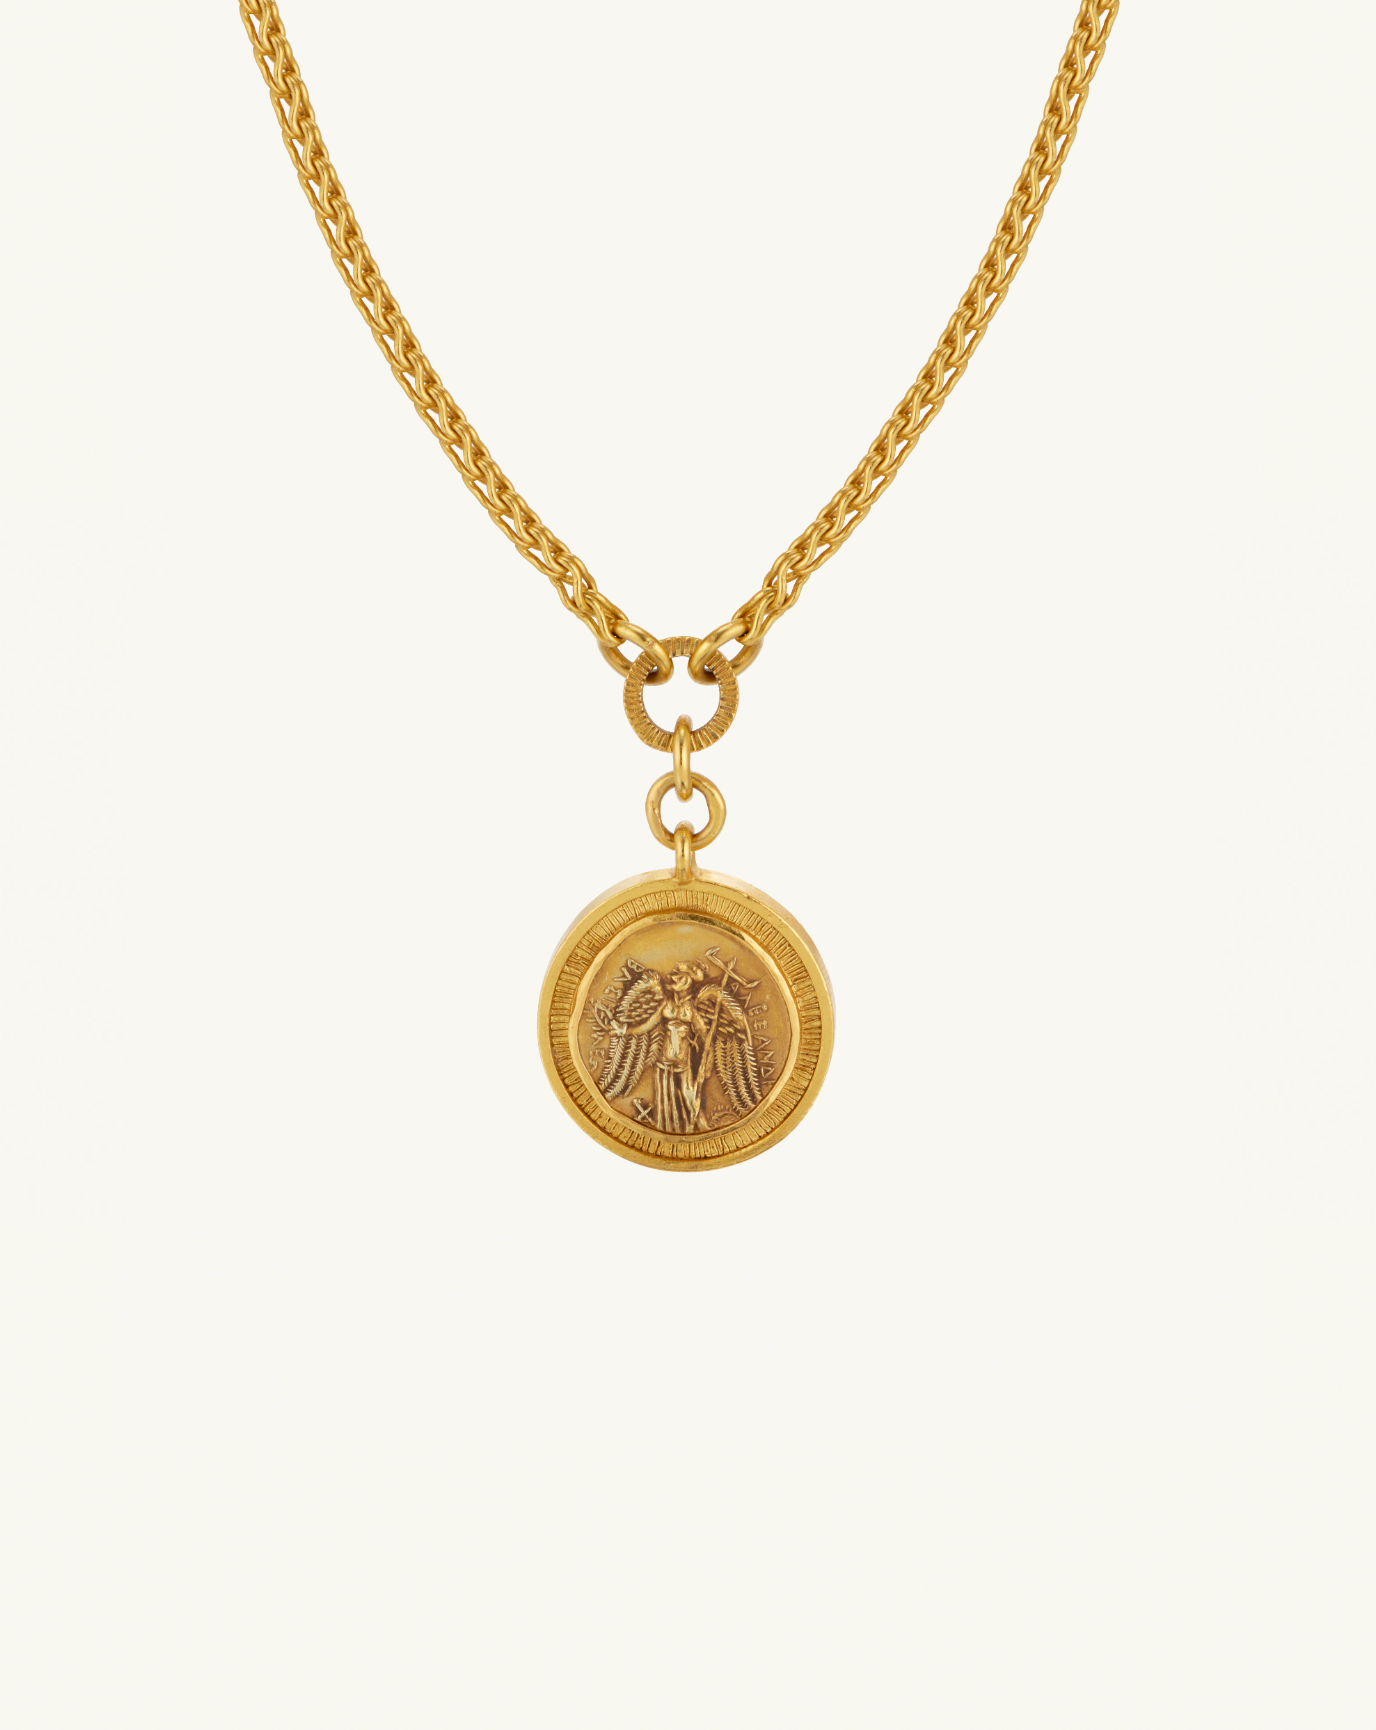 Product image of the reversible coin pendant with a chain